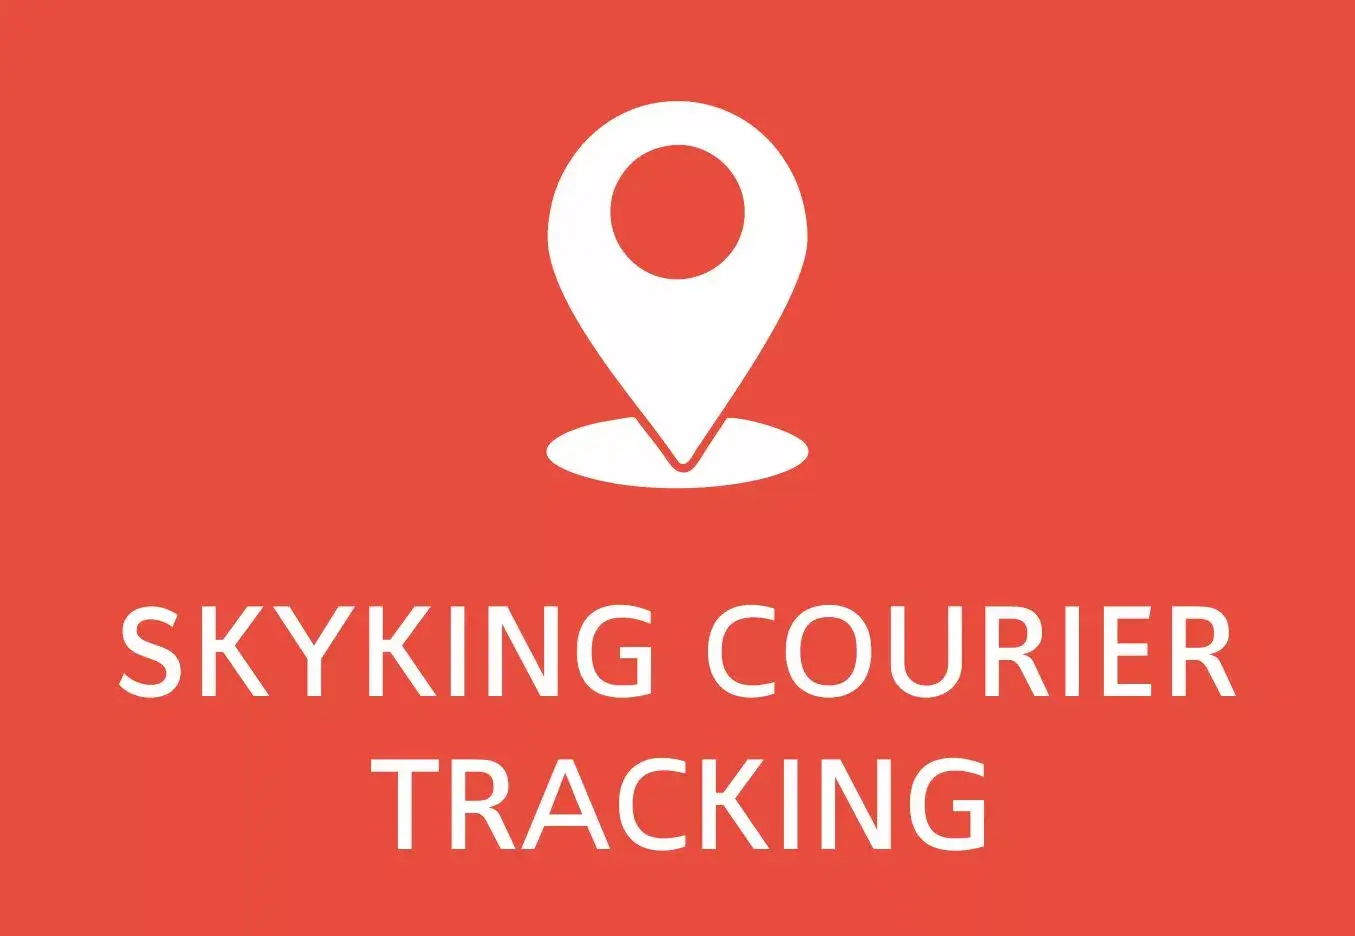 Skyking Courier Tracking